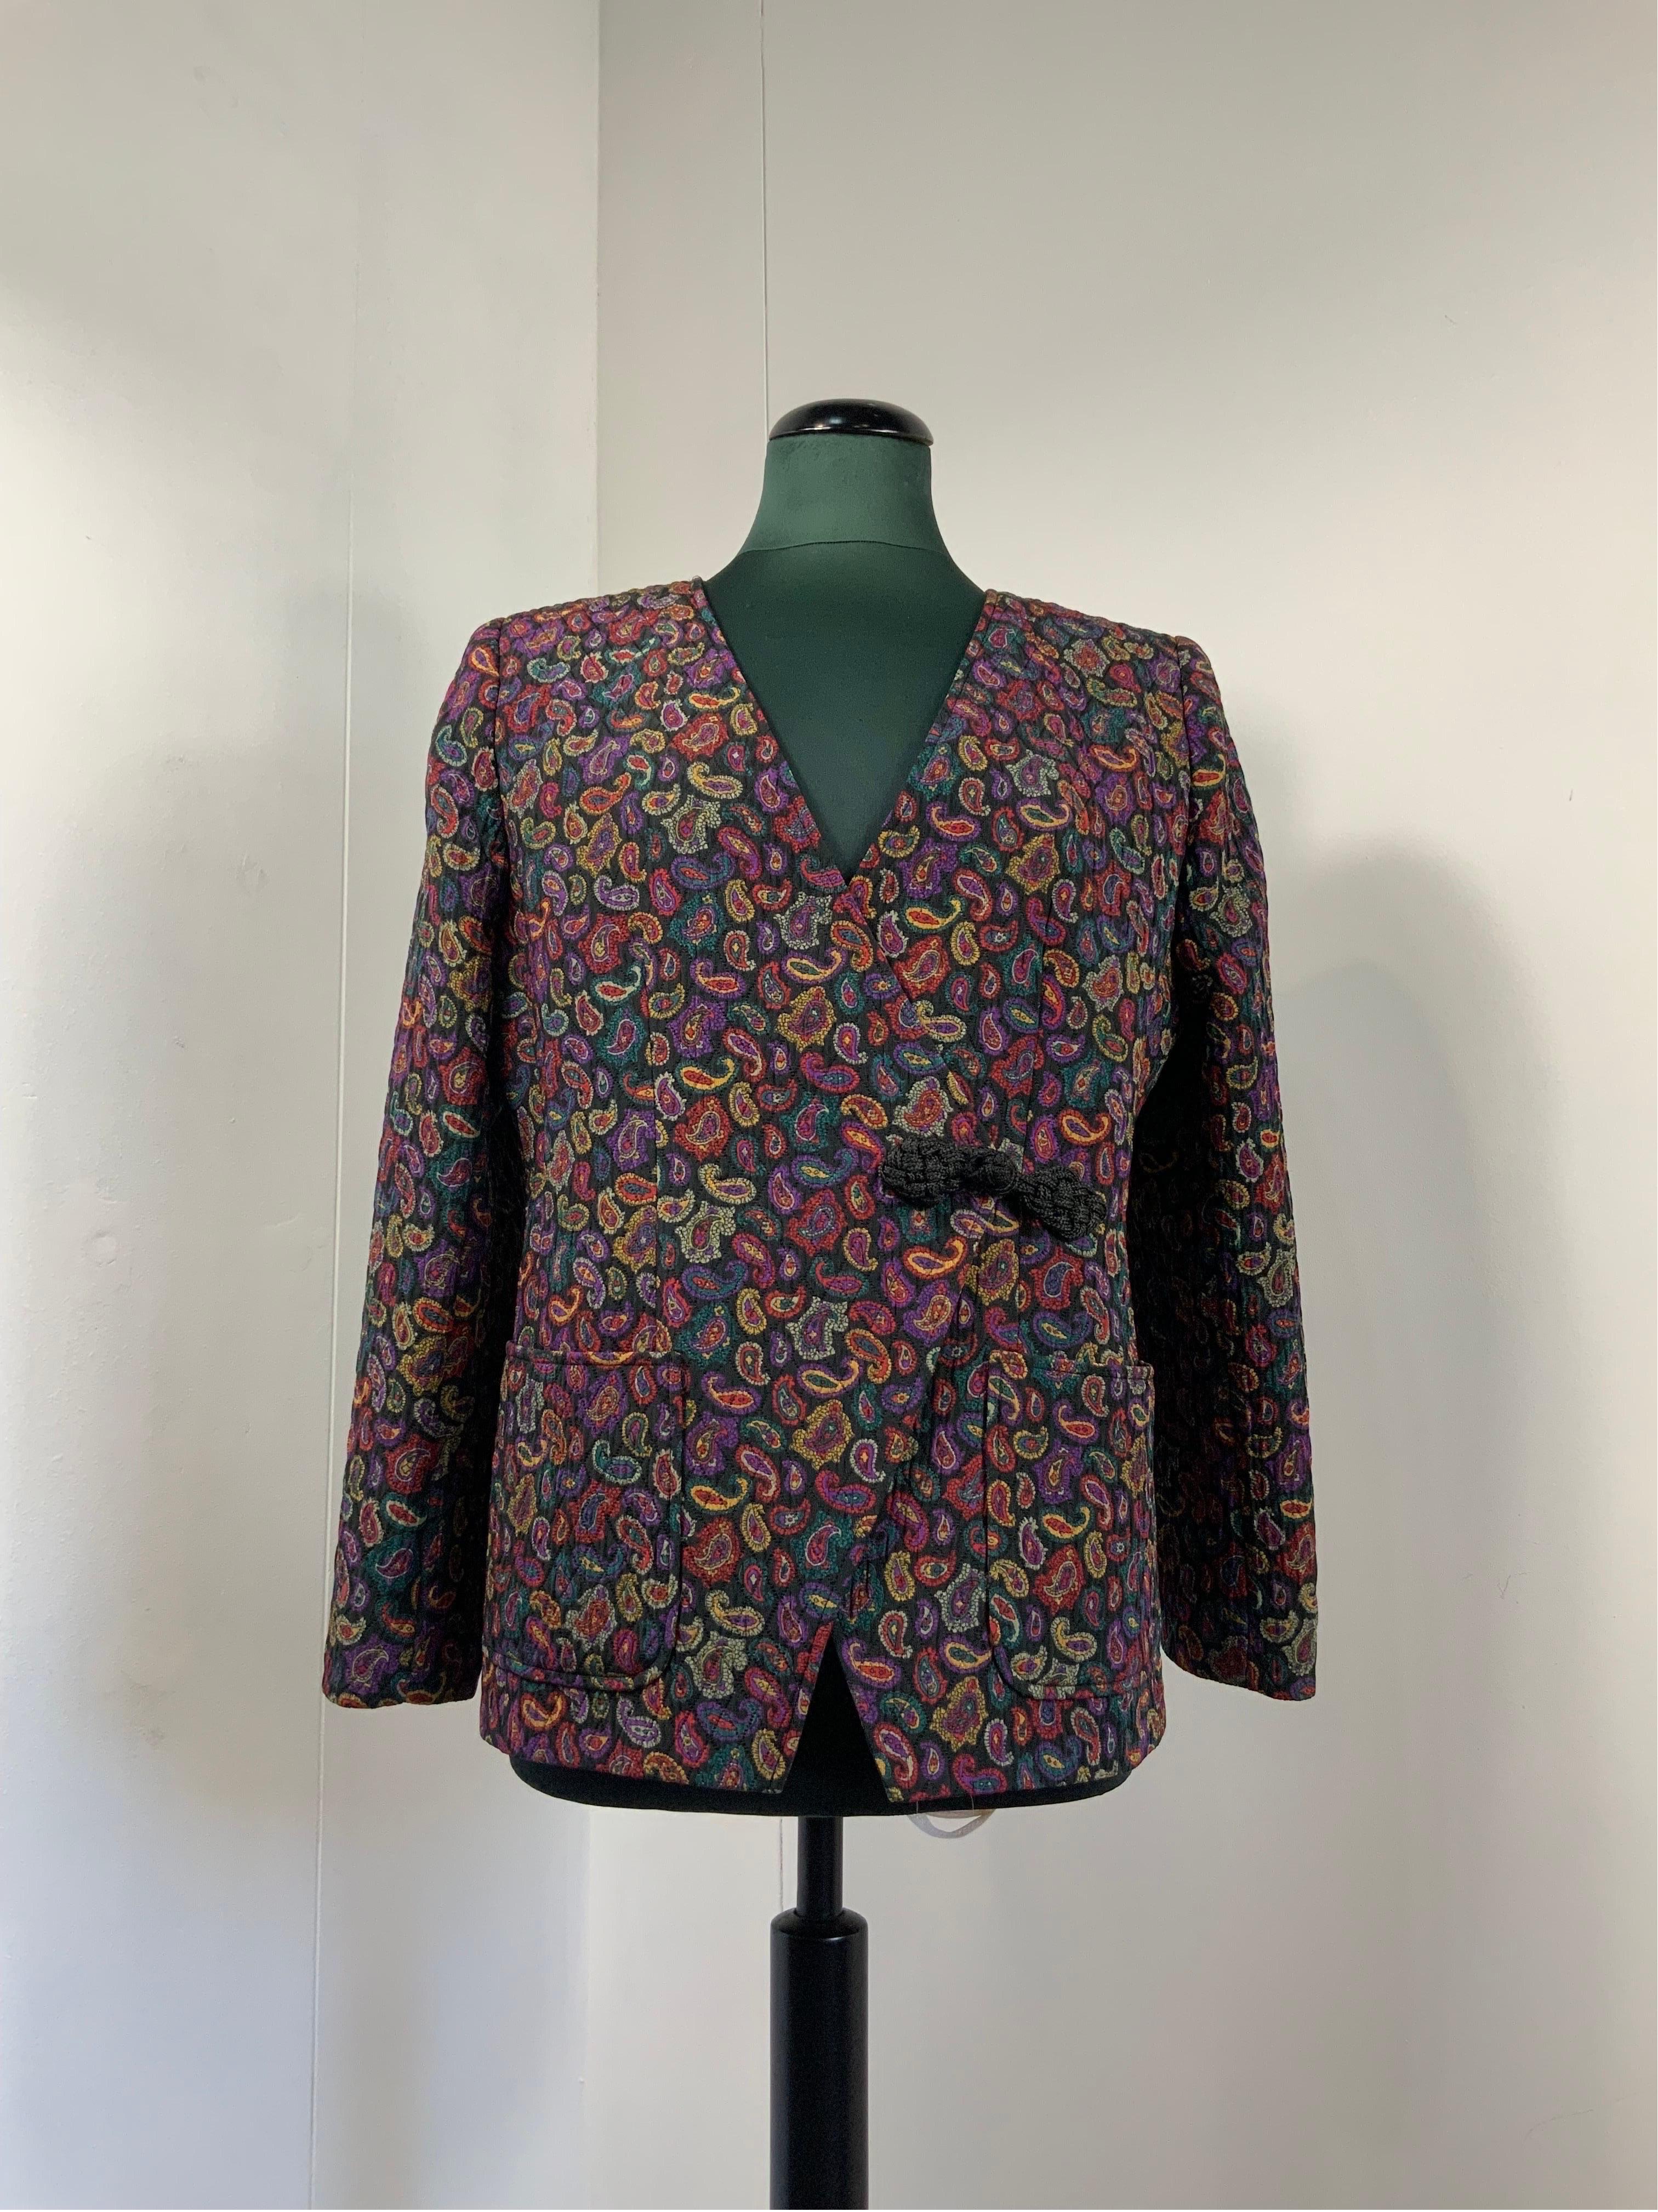 VALENTINO PAISLEY JACKET.
Valentino jacket, Miss V.
In wool and viscose. Lightweight material.
Lined. Parsley fantasy.
Features lightly padded shoulder straps.
Italian size 46.
Shoulders 46 CM
Bust 50 CM
Length 70 CM
Channel 61 CM
In excellent